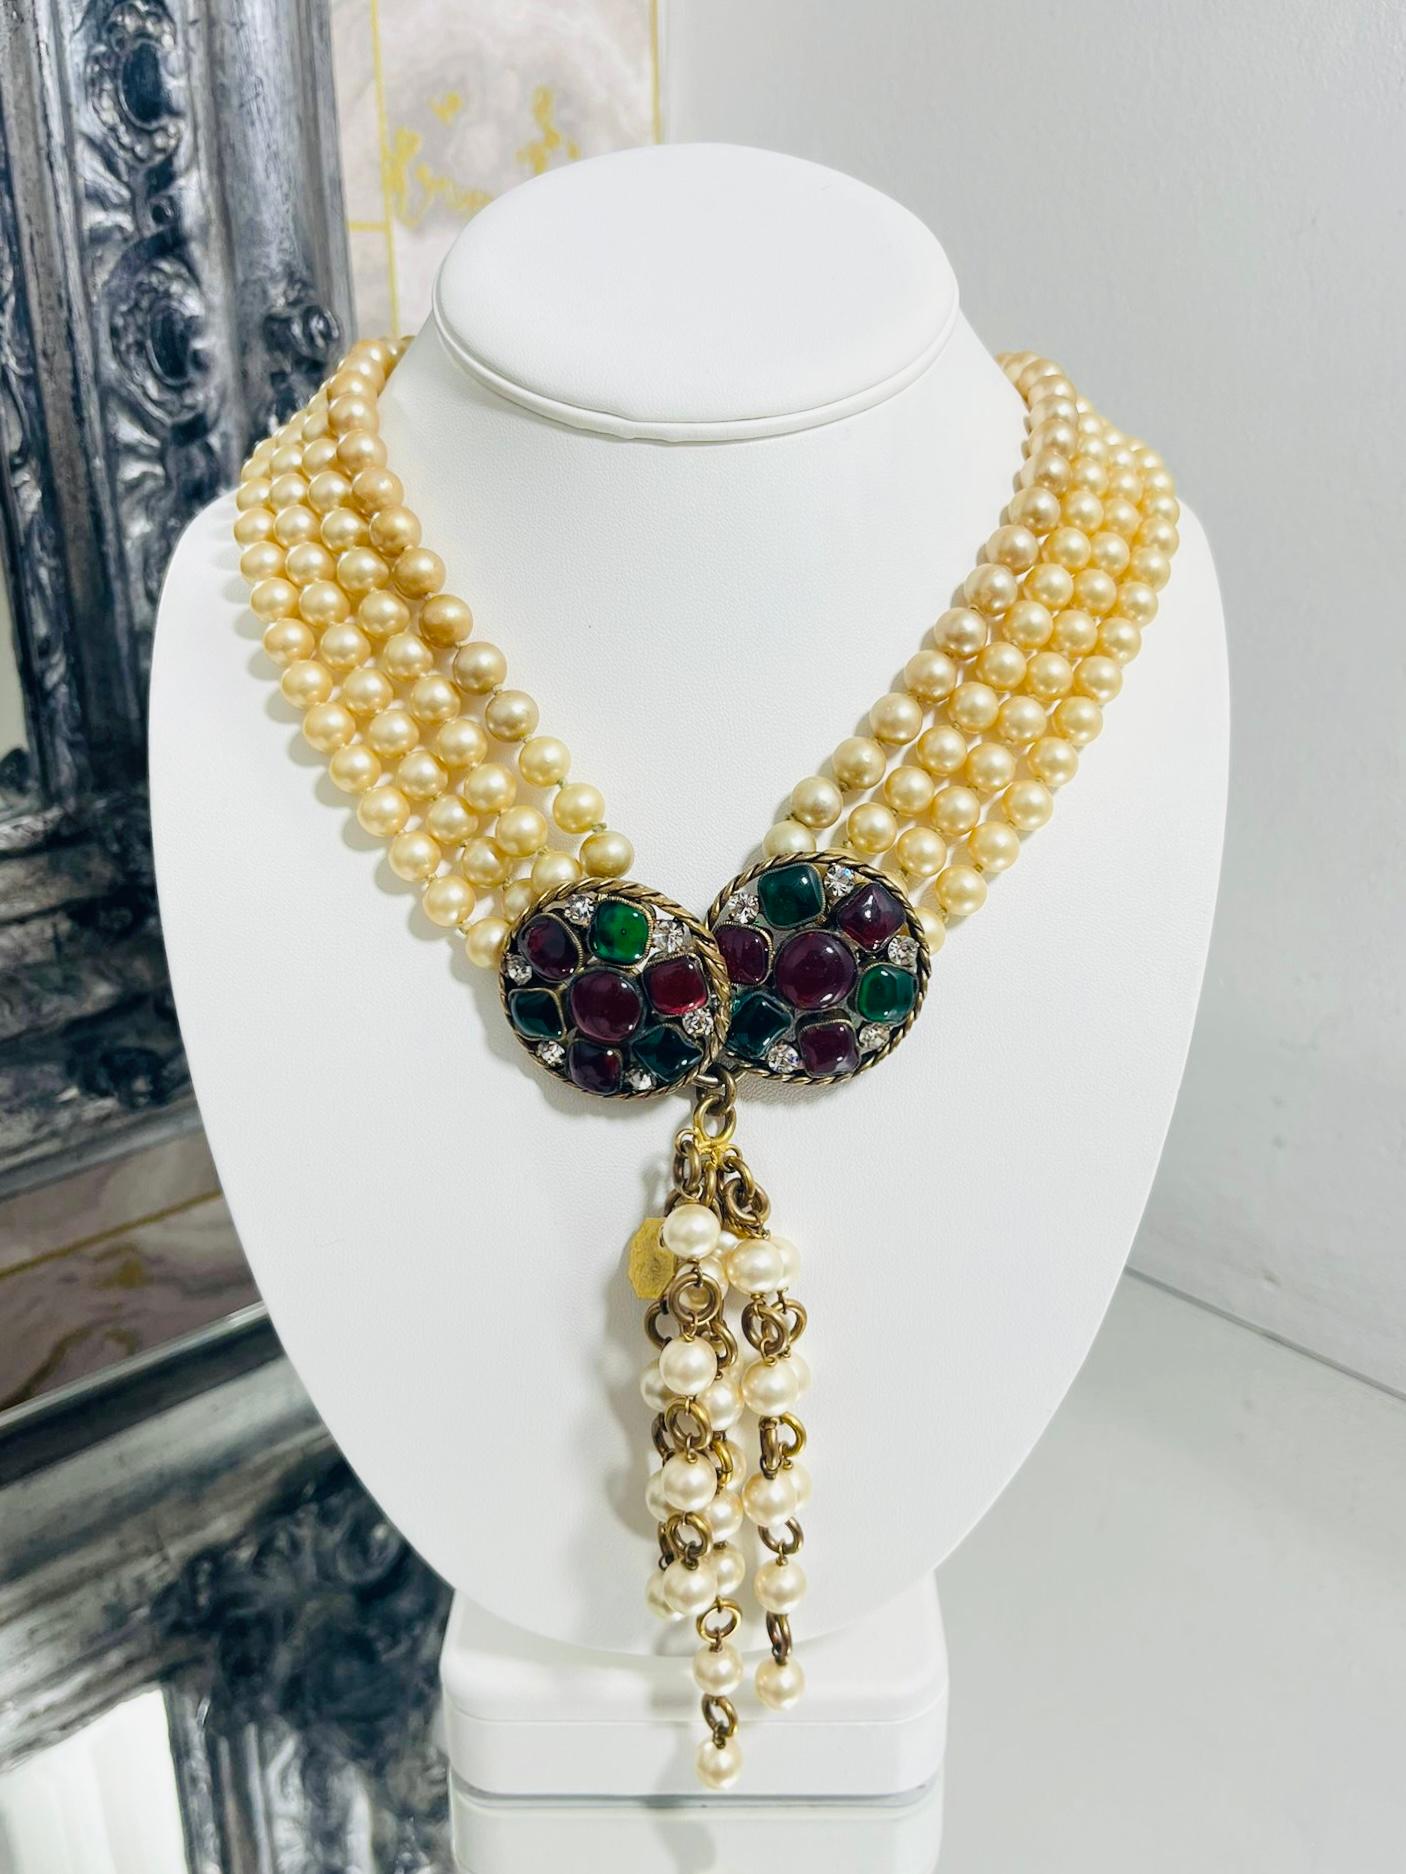 Chanel Vintage Pearl & Gripoix Necklace By Victoire de Castellane

Pearl necklace which featuring ornate gripoix and crystal detailing.

Four strands of faux pearls with 24k gold plated trim, set with multicoloured 

glass/gripoix, crystals and